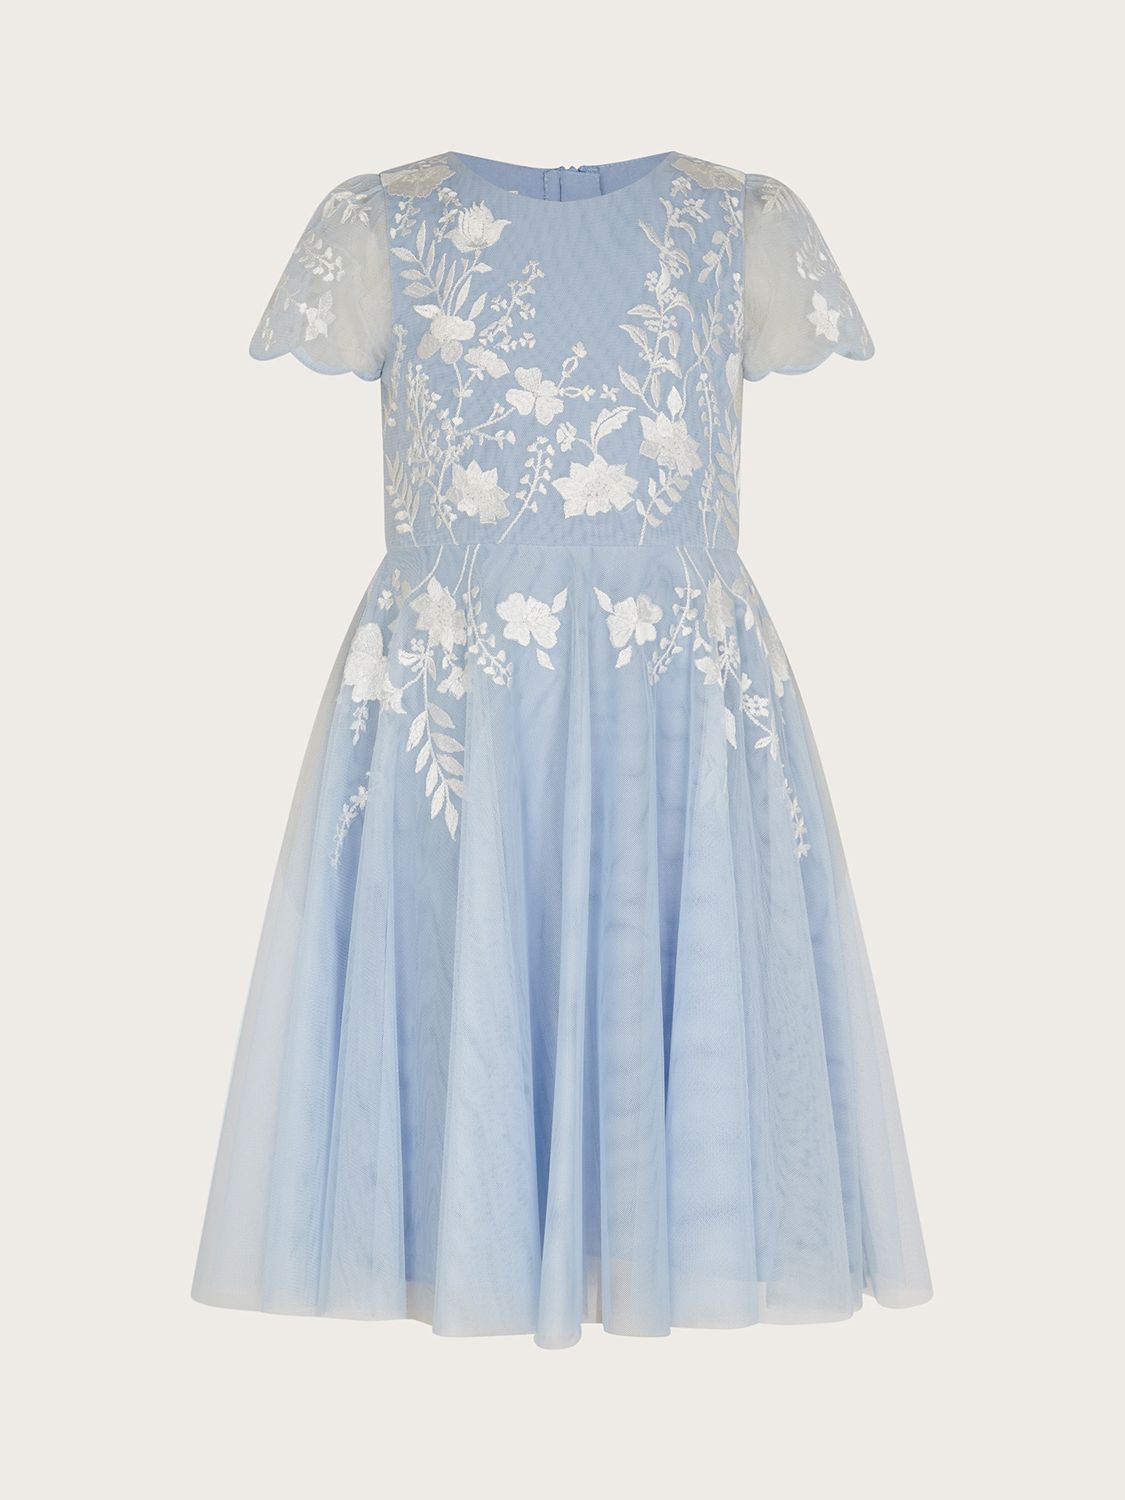 Monsoon Kids' Emmy Embroidered Tulle Party Dress, Blue, 10 years